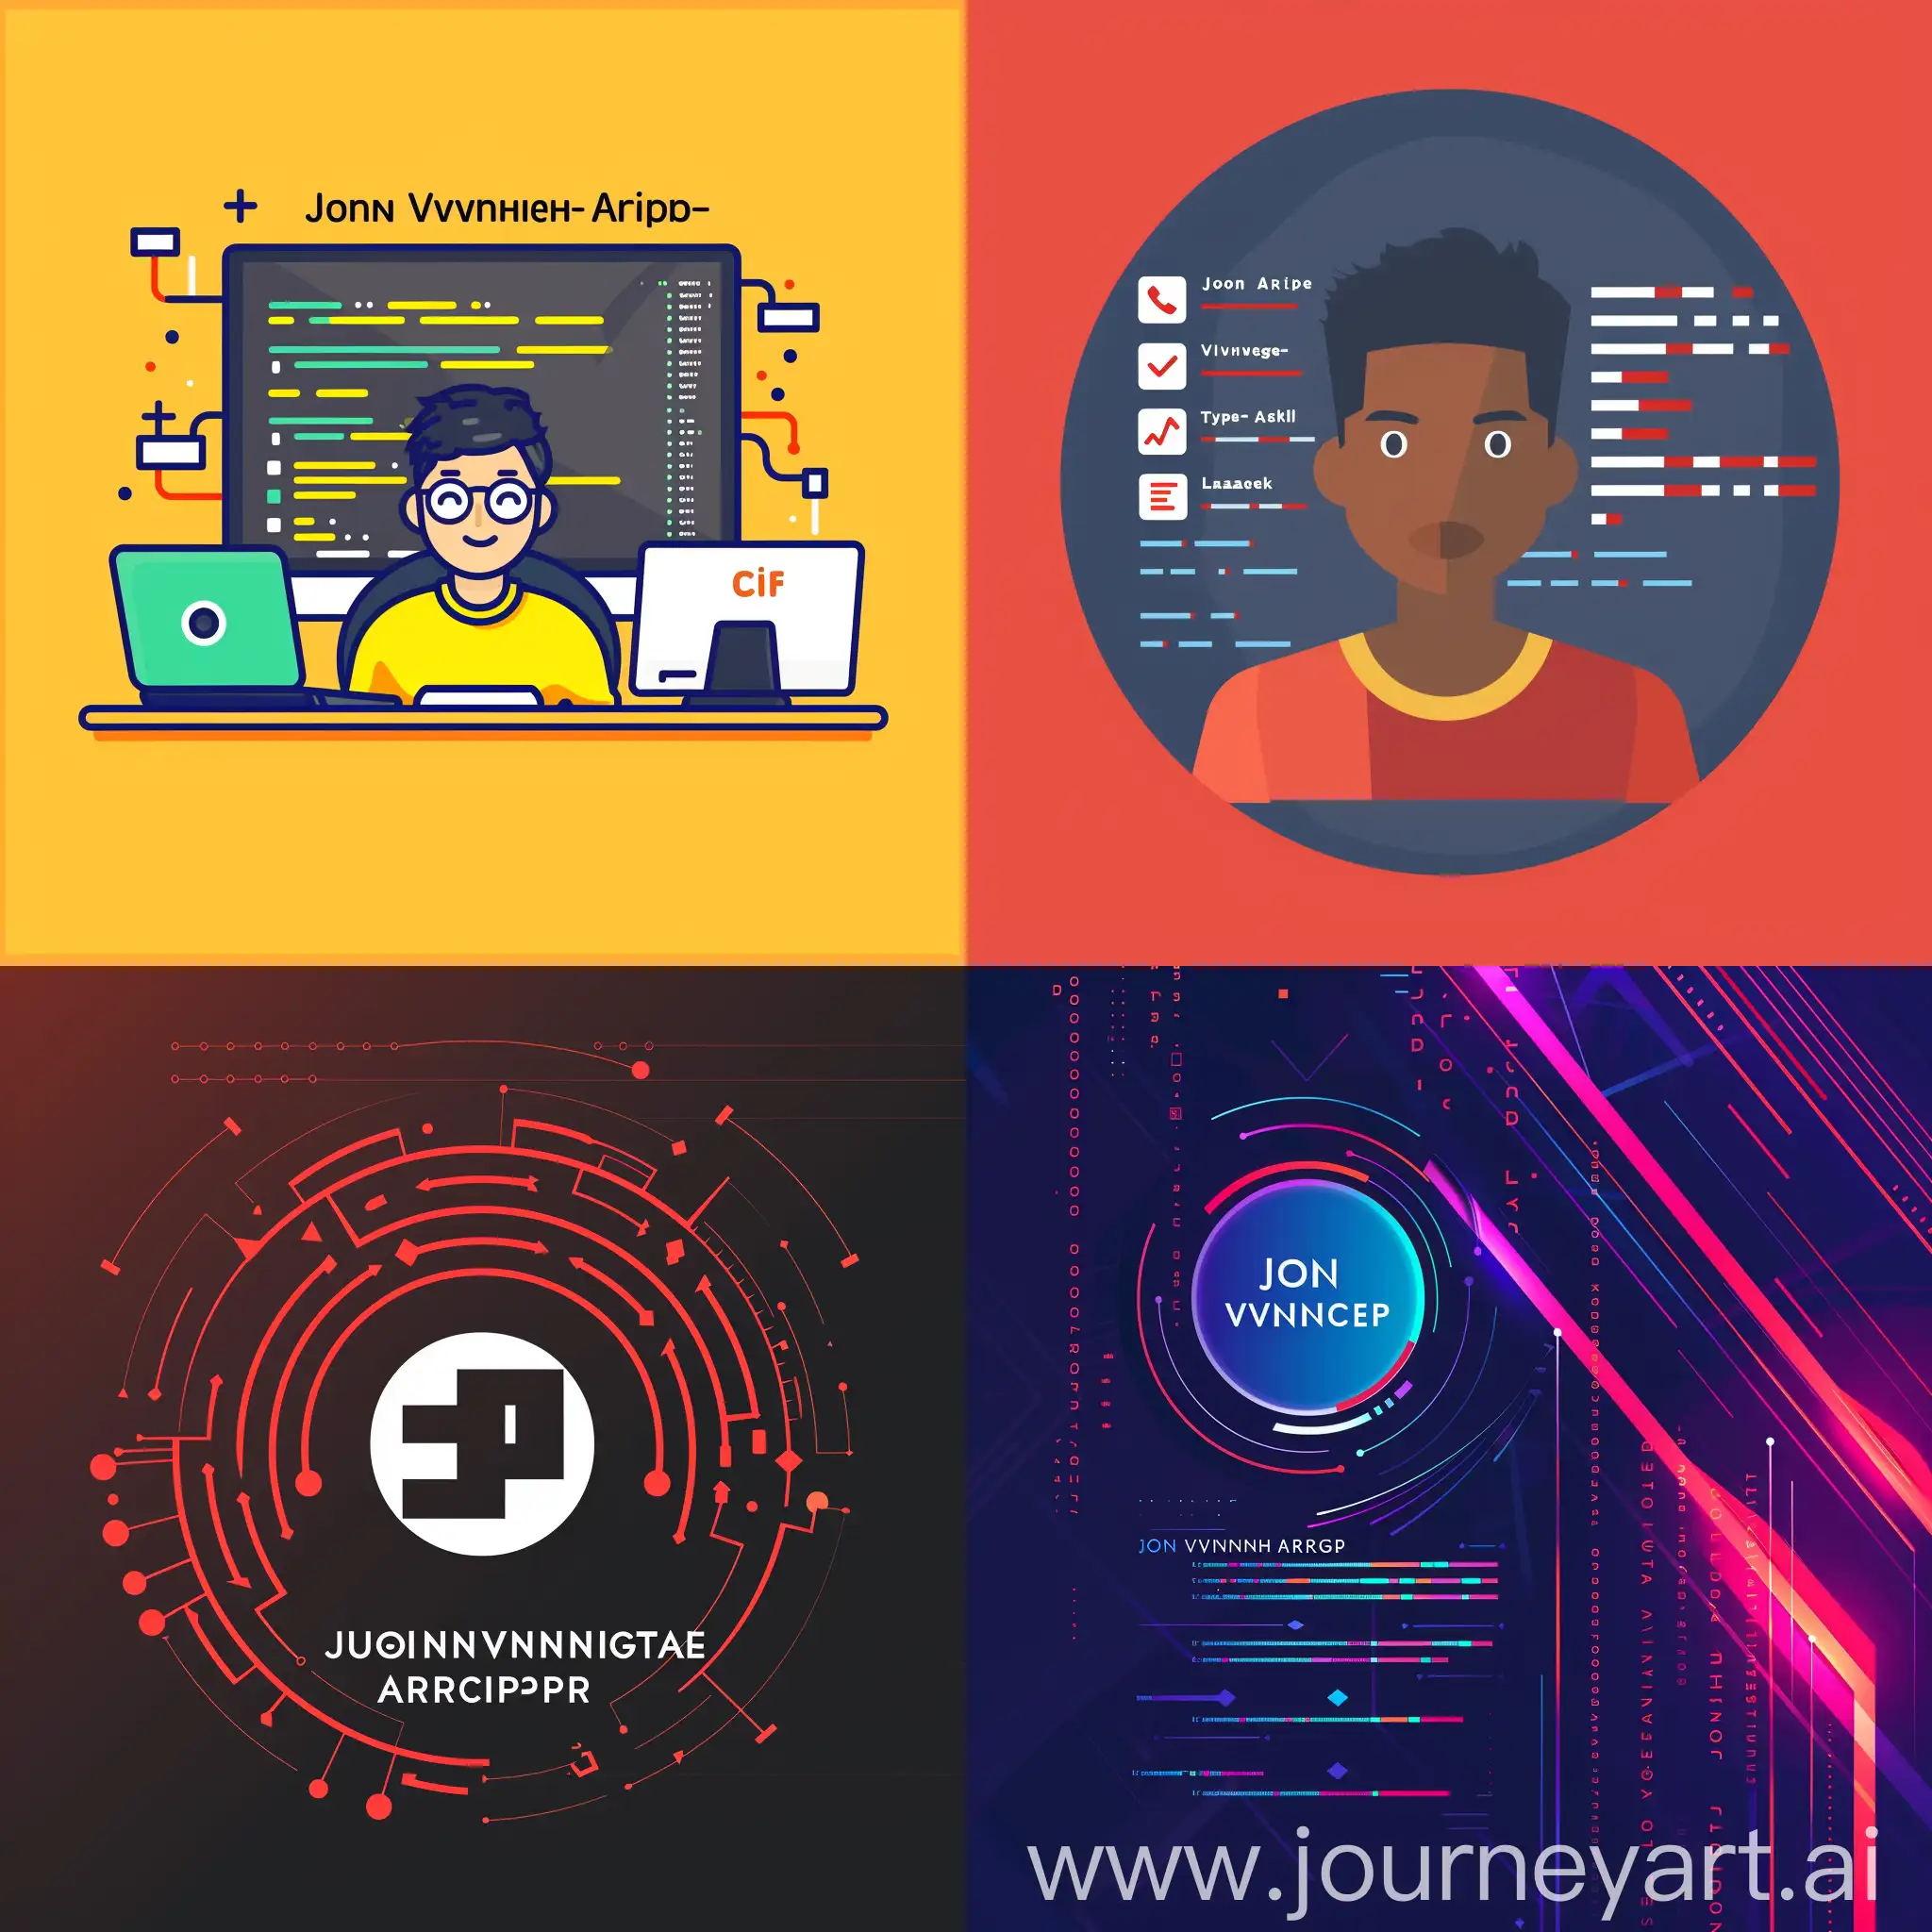 linkedin banner with my name: Jhonn Vincent Arcipe and title: Software Engineer skill icon Java, Javascript,Typescript, Php, Laravel, Git make it minimalist abstract and artistic